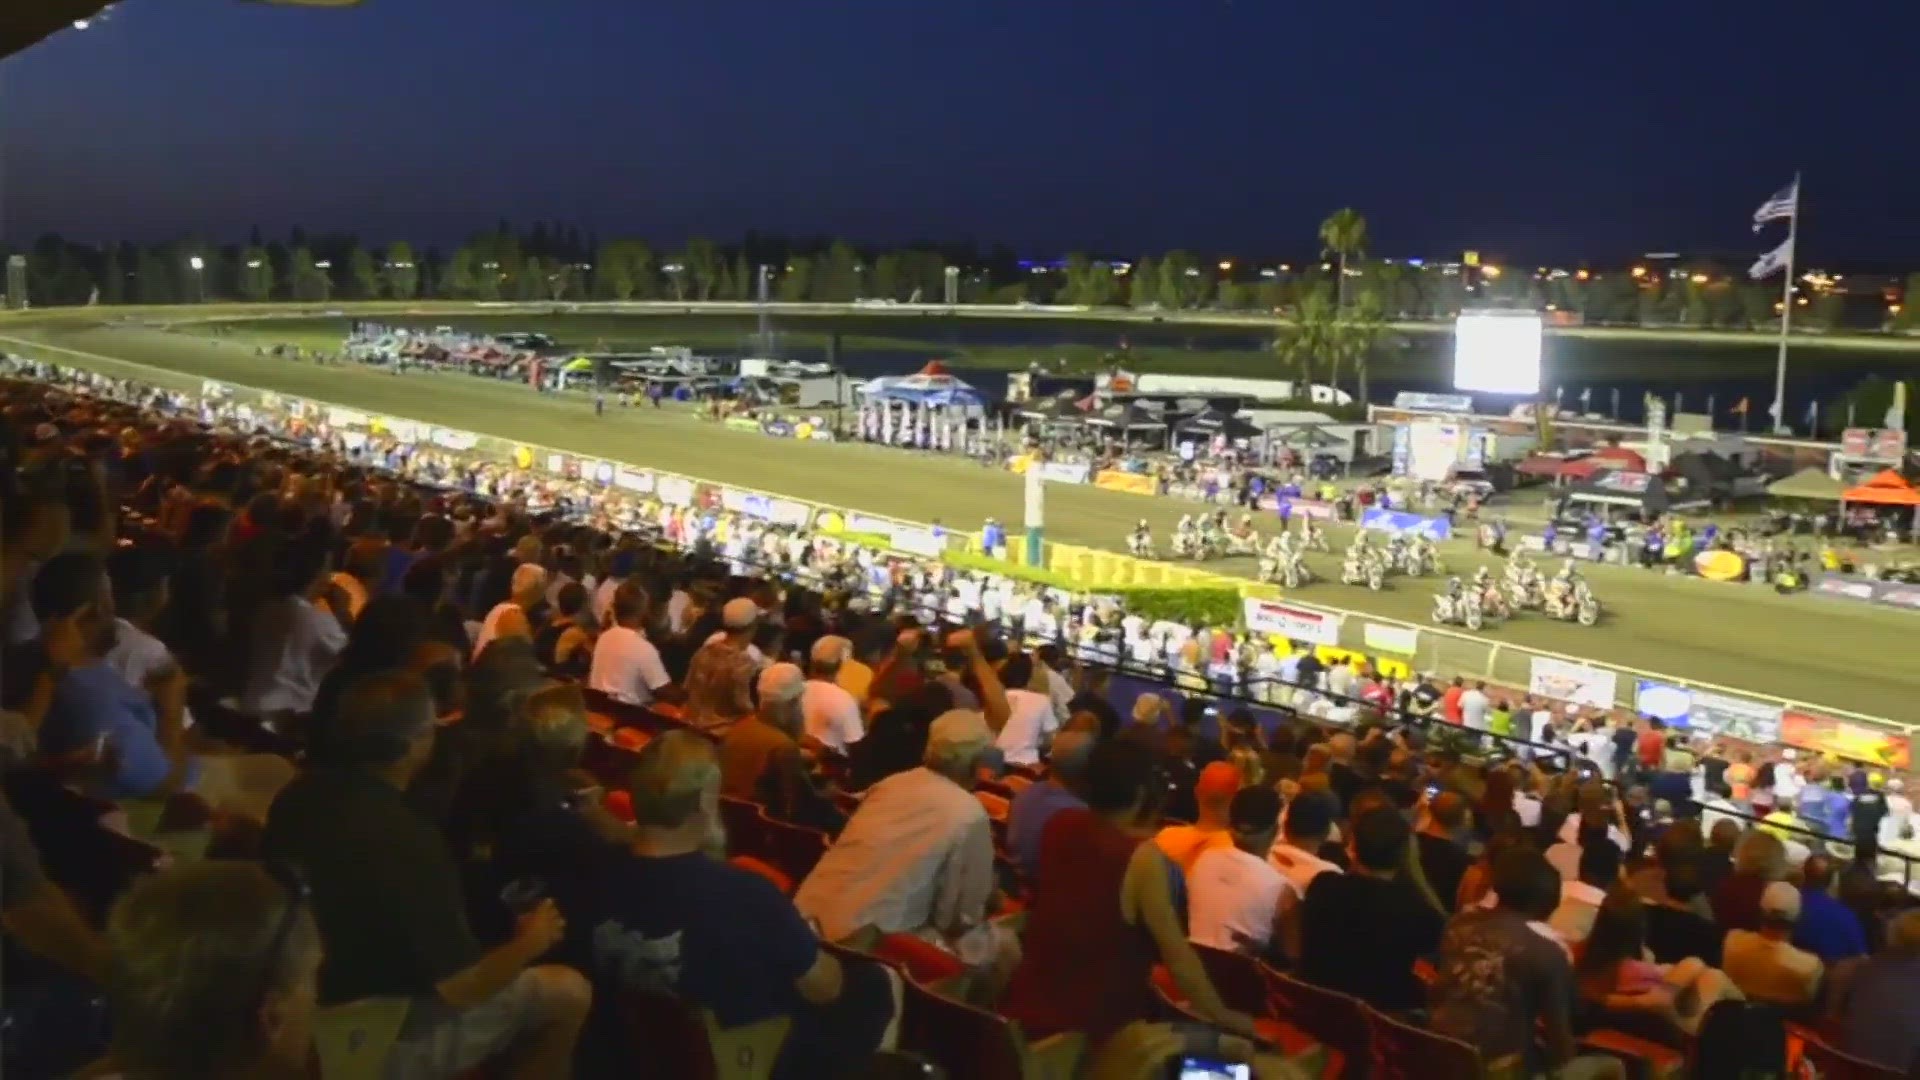 The 58th edition of the Sacramento Mile will speed through Cal Expo once again, hosting the nations best flat track motorcycle racers can have.